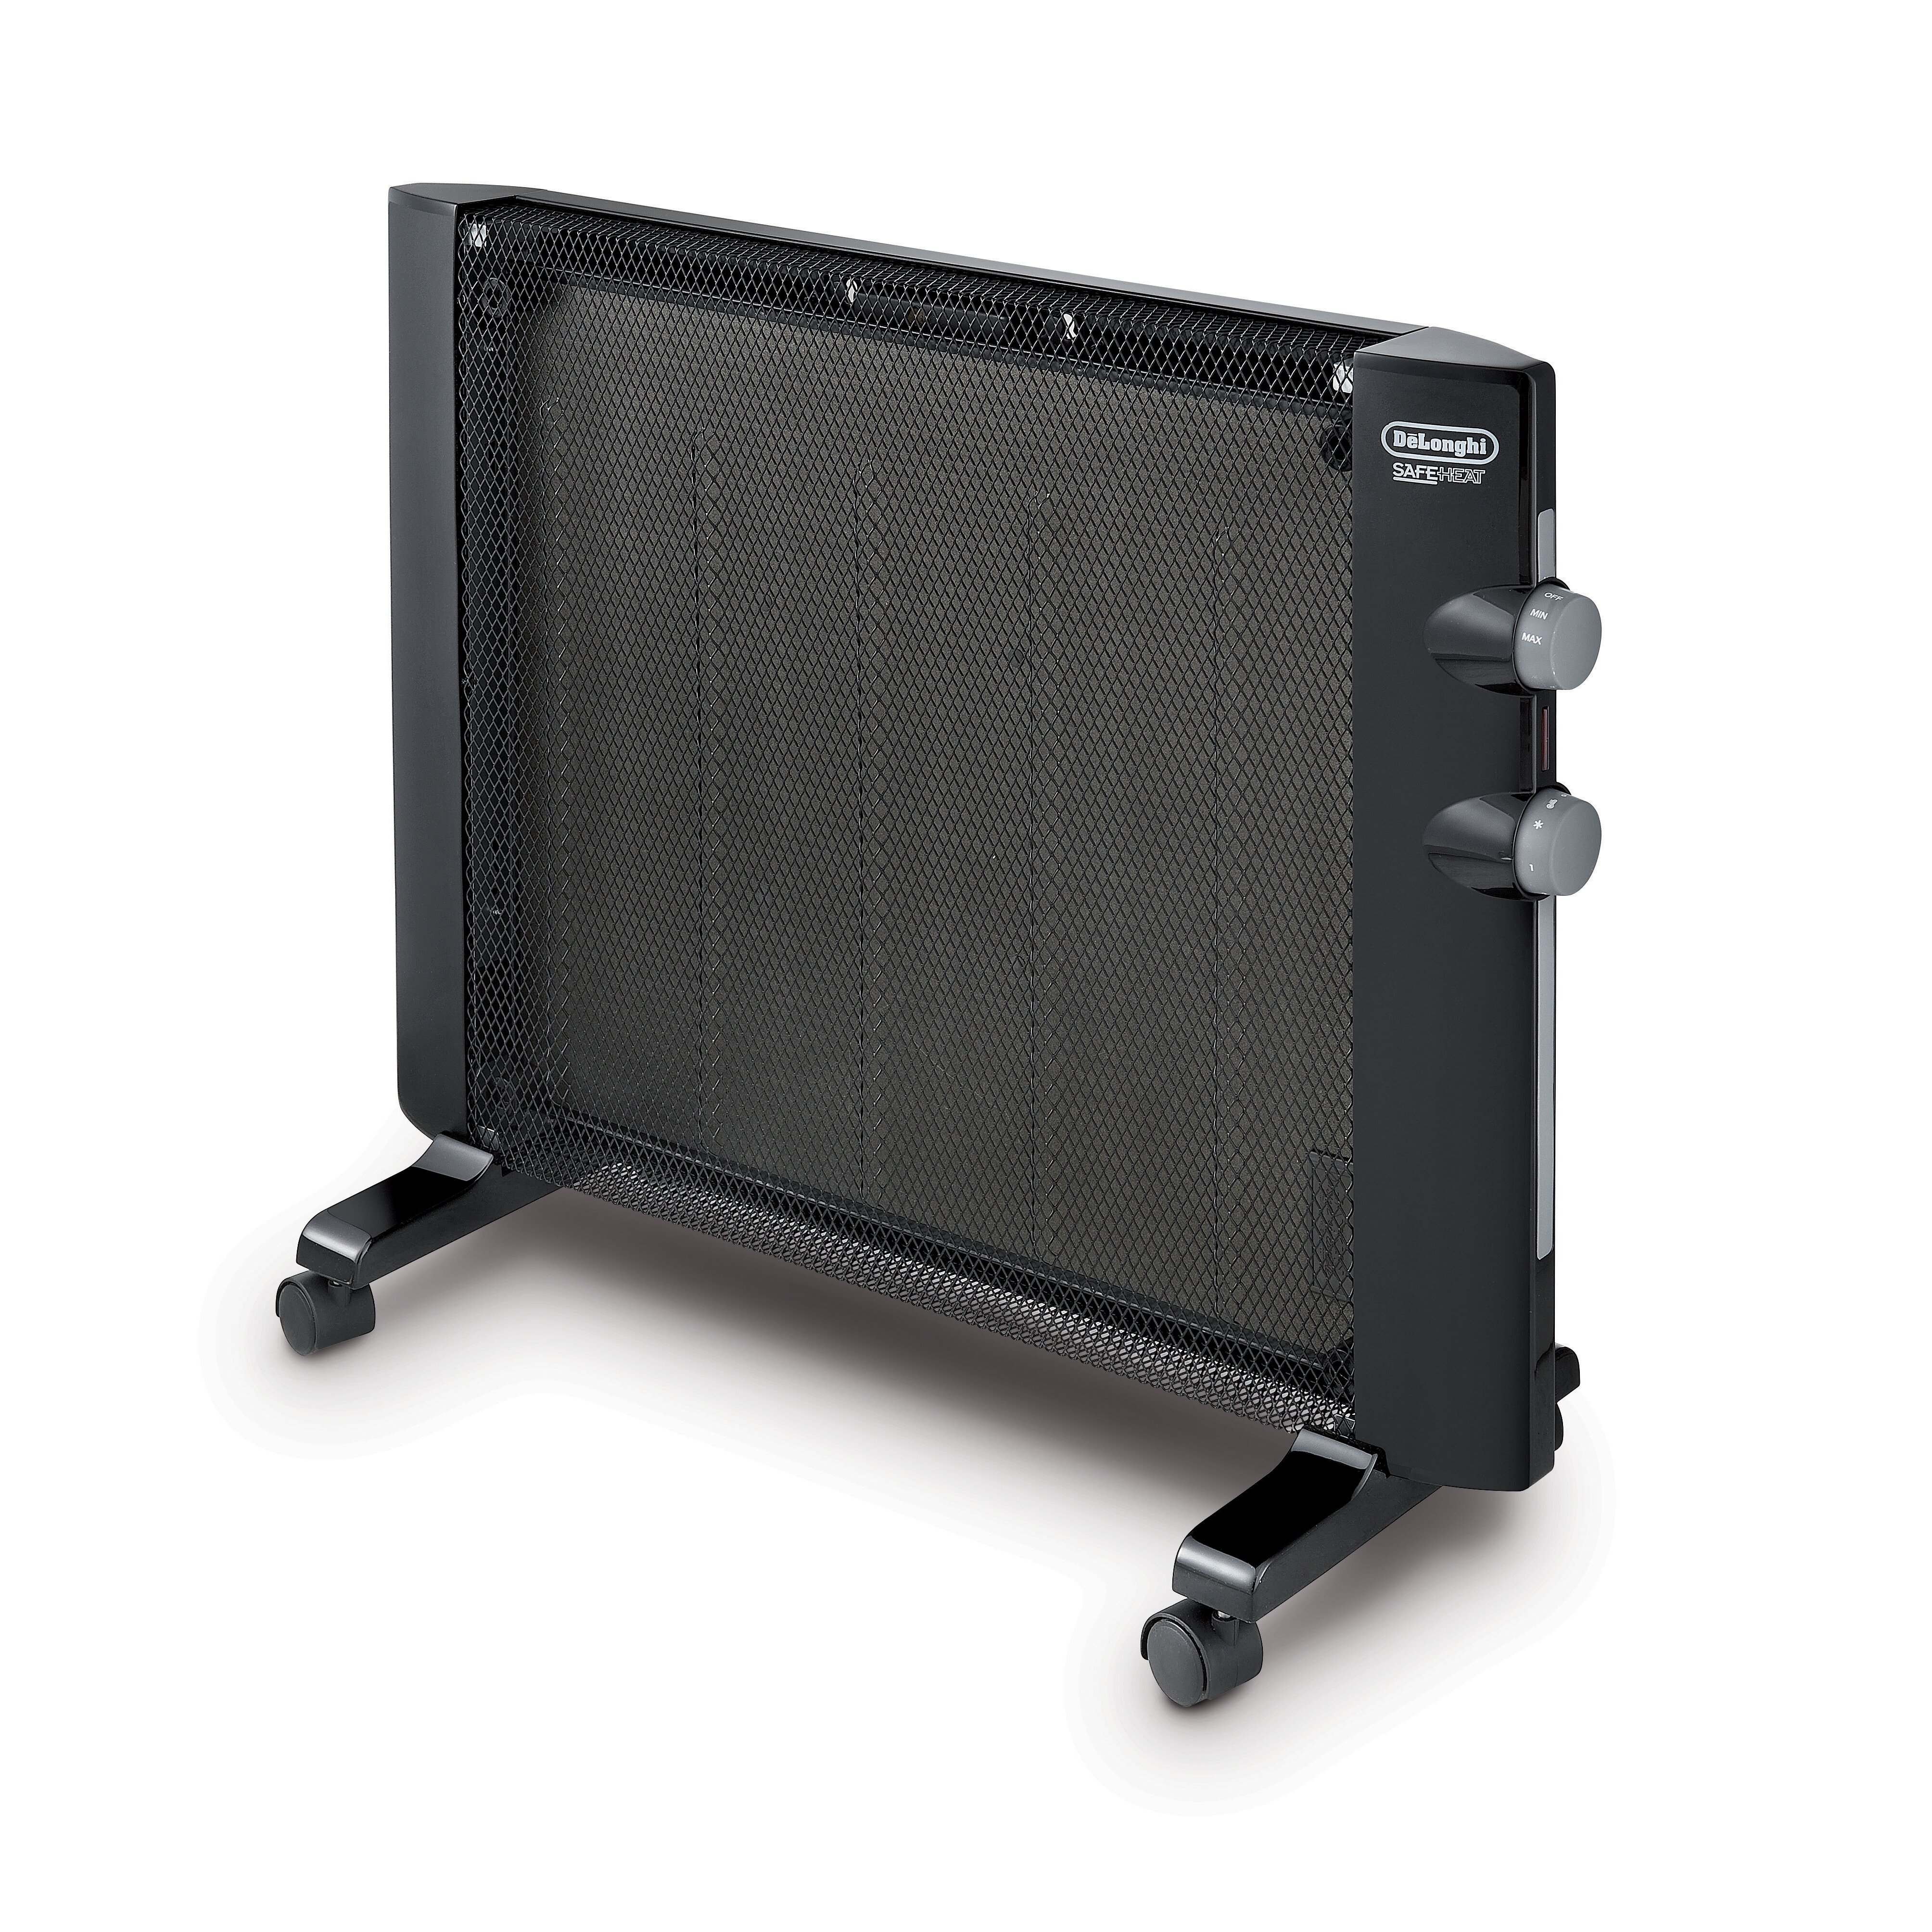 electric radiant panel heaters reviews